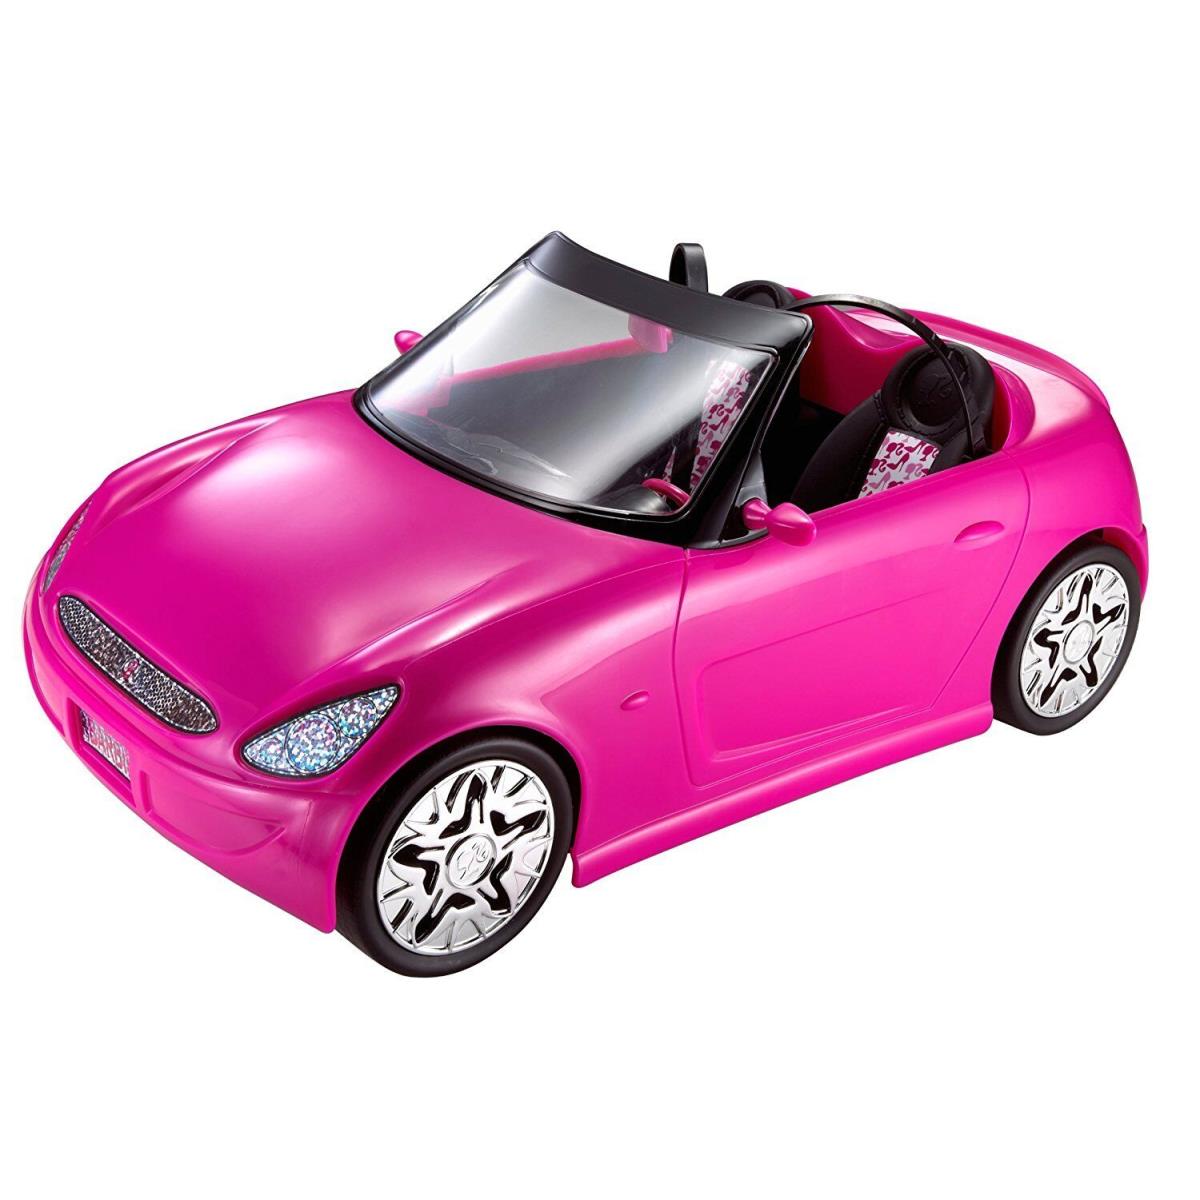 Barbie Pink Glam Convertible Car Doll Vehicle w Pink White Patterned Seats